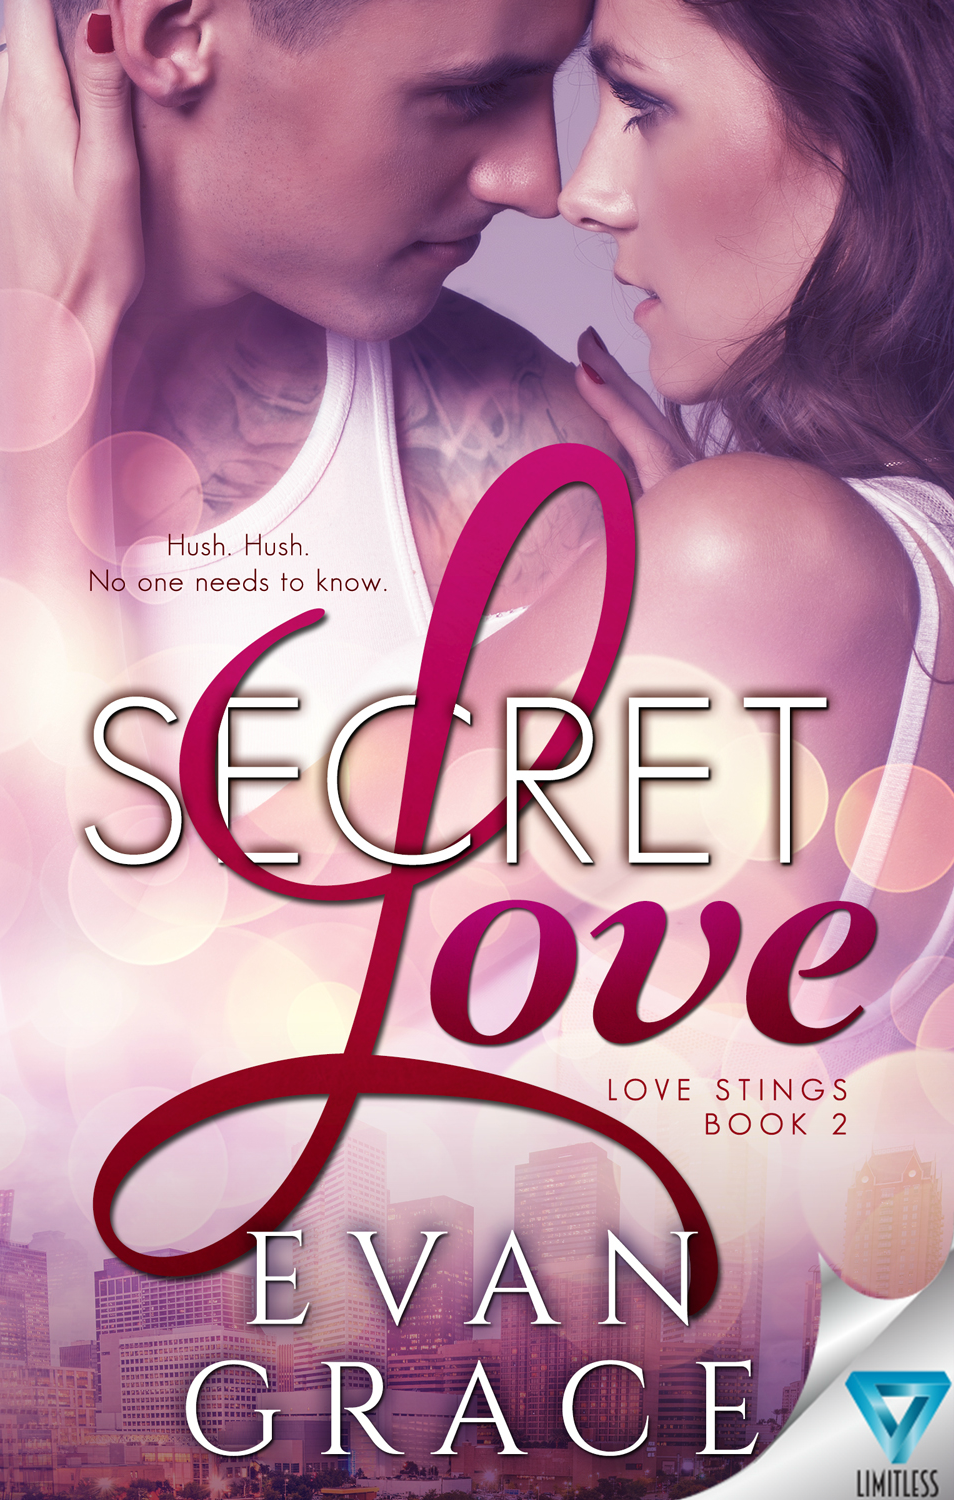 SECRET LOVE by Evan Grace RELEASE picture pic pic